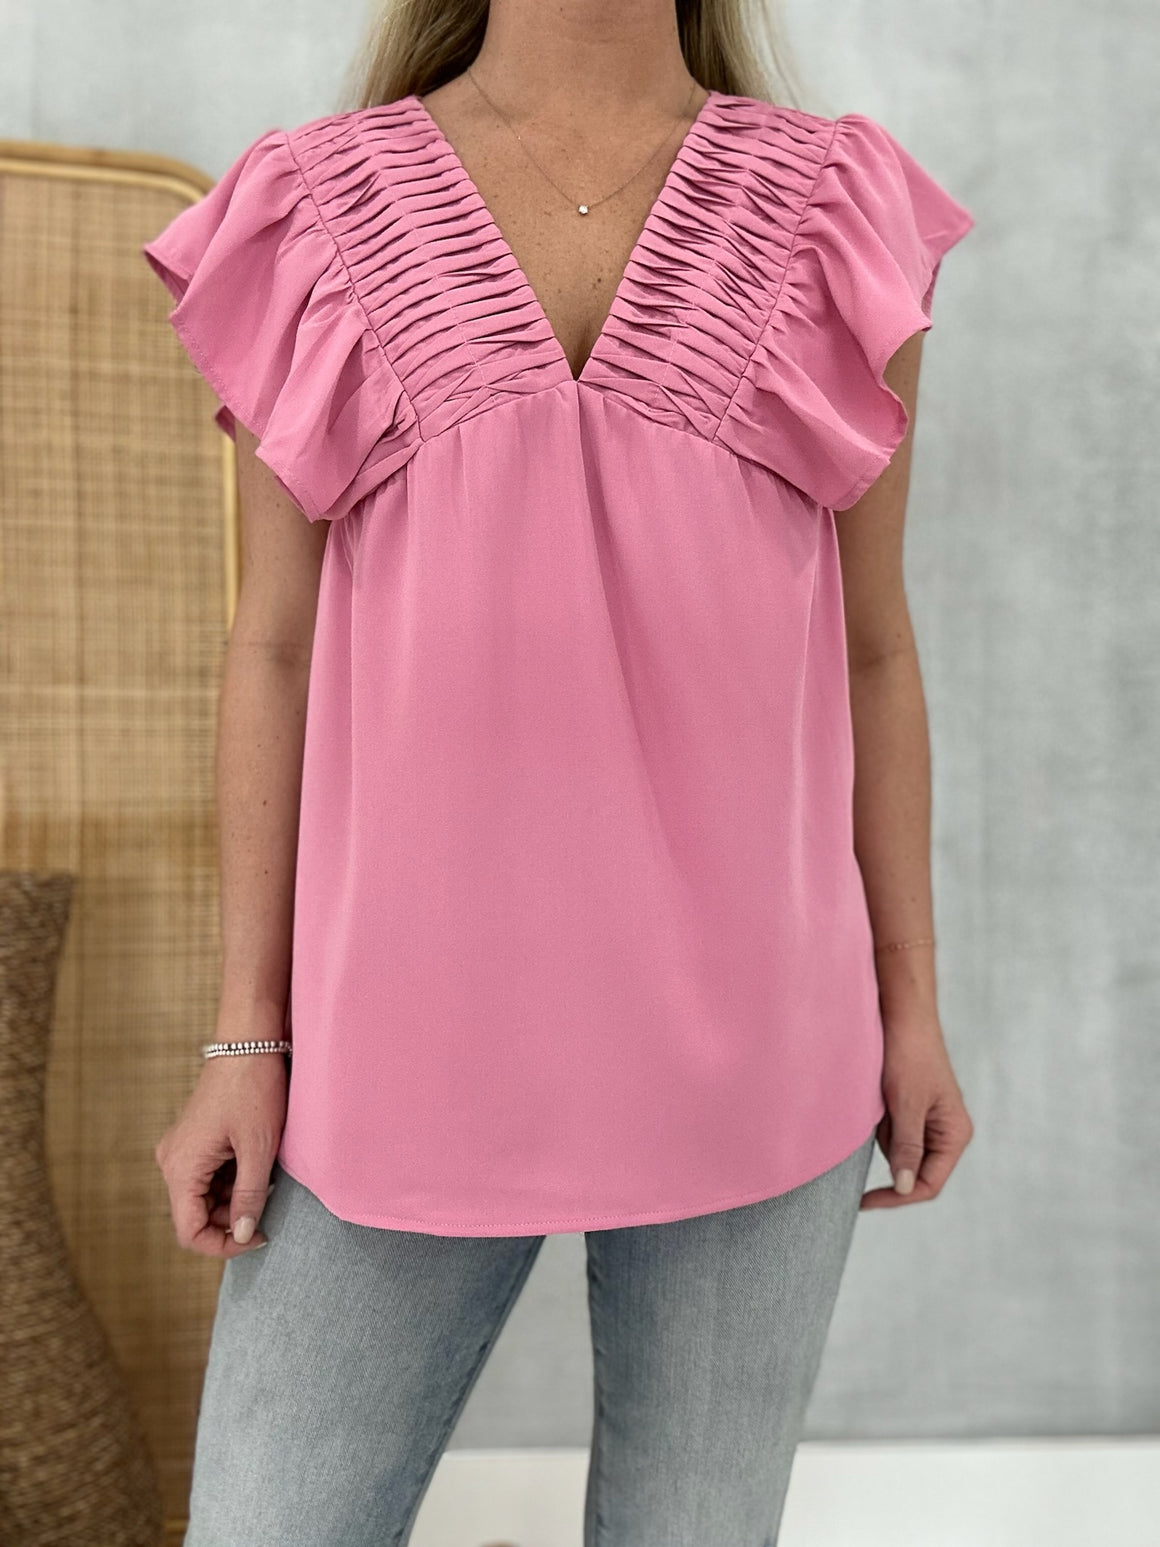 Intertwined With You Top - Pink